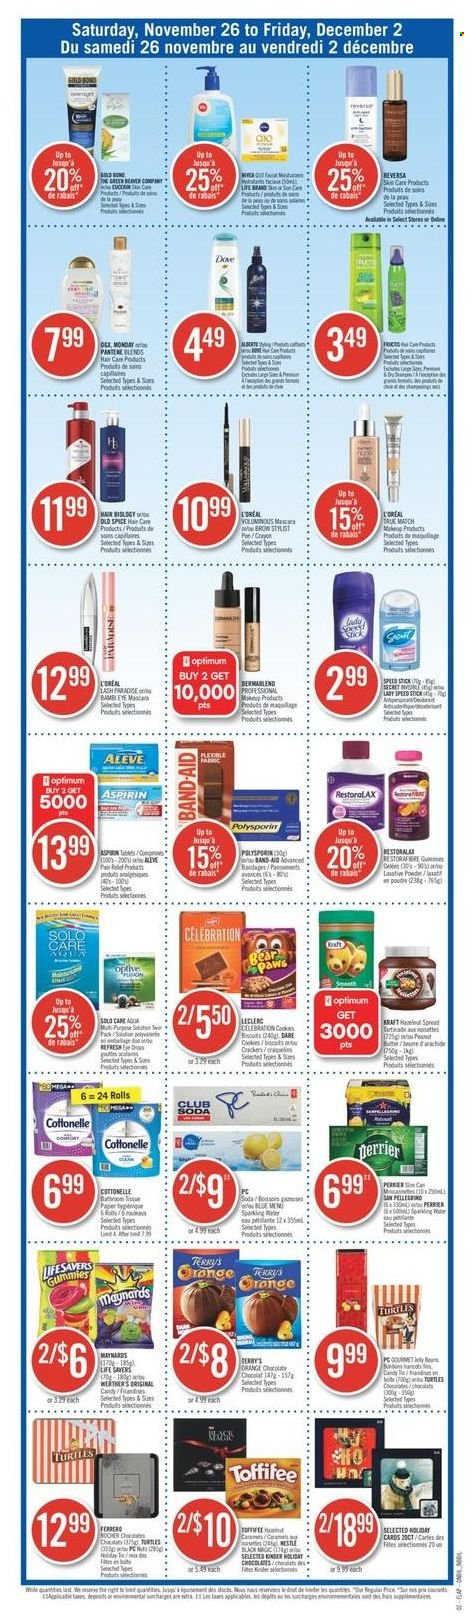 Shoppers Drug Mart Flyer - November 26, 2022 - December 02, 2022 - Sales products - Kraft®, cookies, Dove, chocolate, jelly, Celebration, crackers, biscuit, spice, hazelnut spread, Oros, Perrier, Club Soda, sparkling water, bath tissue, Cottonelle, toilet paper, L’Oréal, Speed Stick, makeup, pot, pan, Optimum, sofa, Aleve, laxative, aspirin, paint, band-aid, Old Spice, Ferrero Rocher. Page 2.